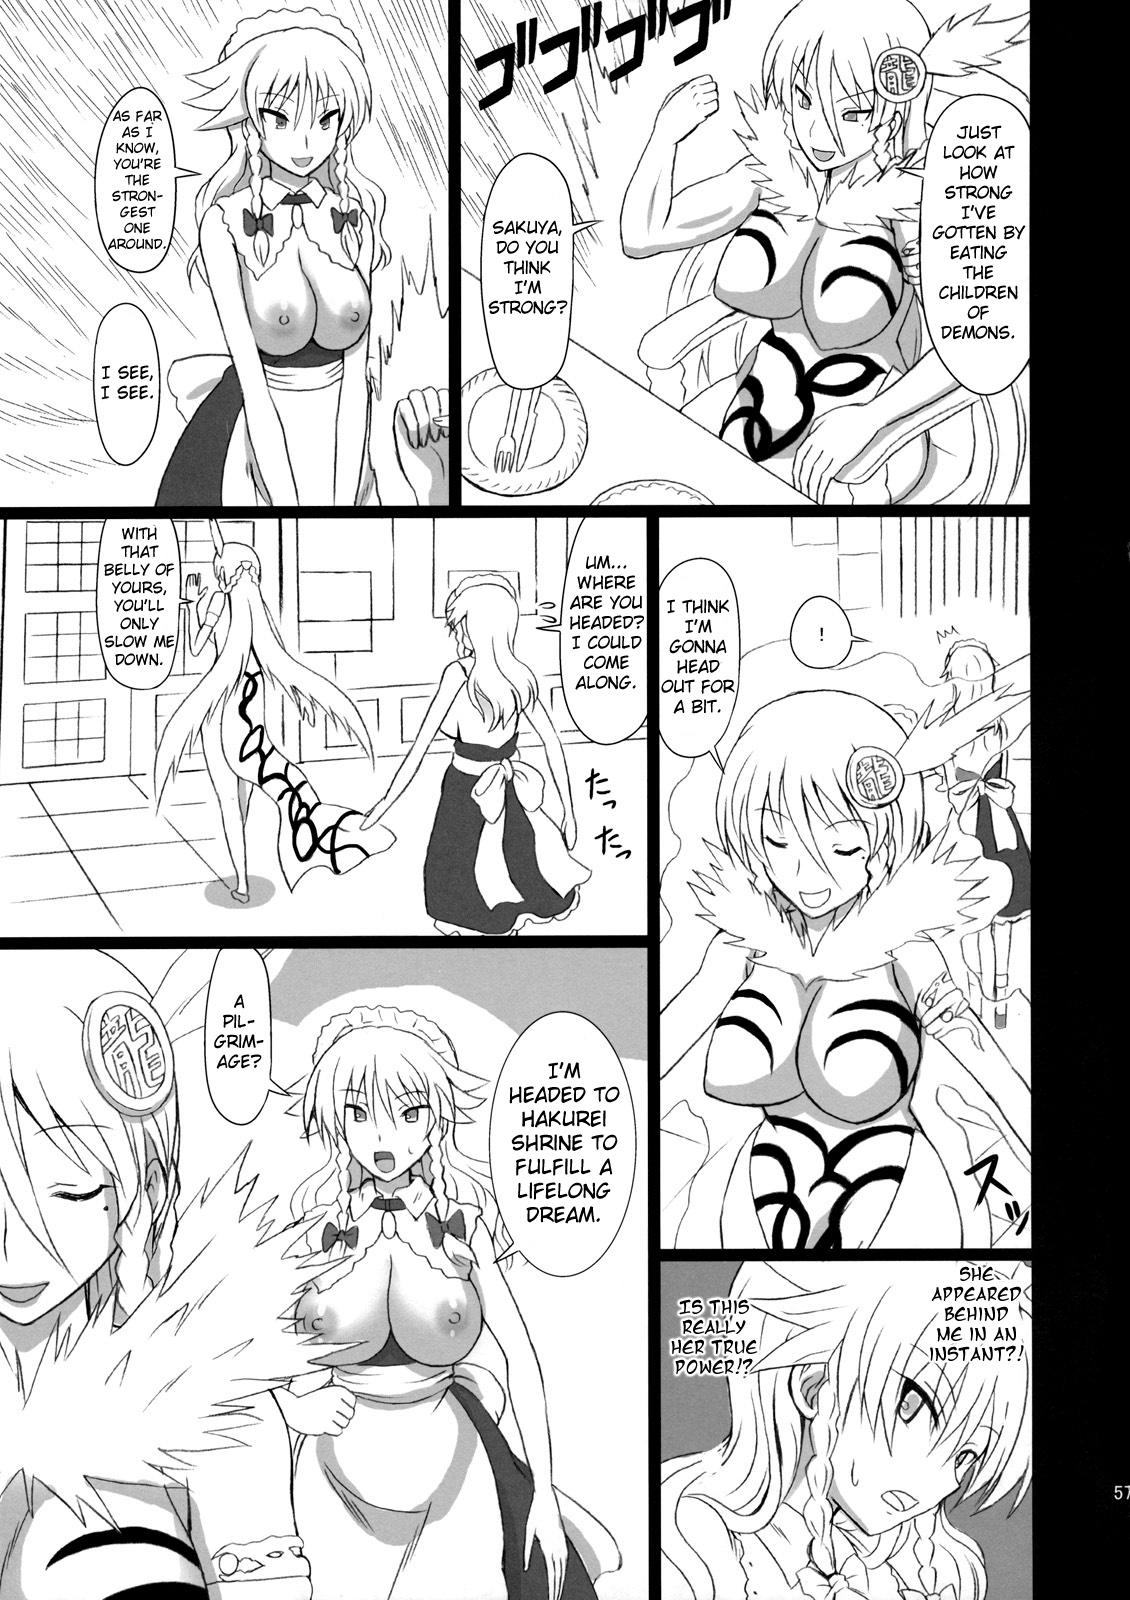 Friend Extend Party 3 - Touhou project Grande - Page 57